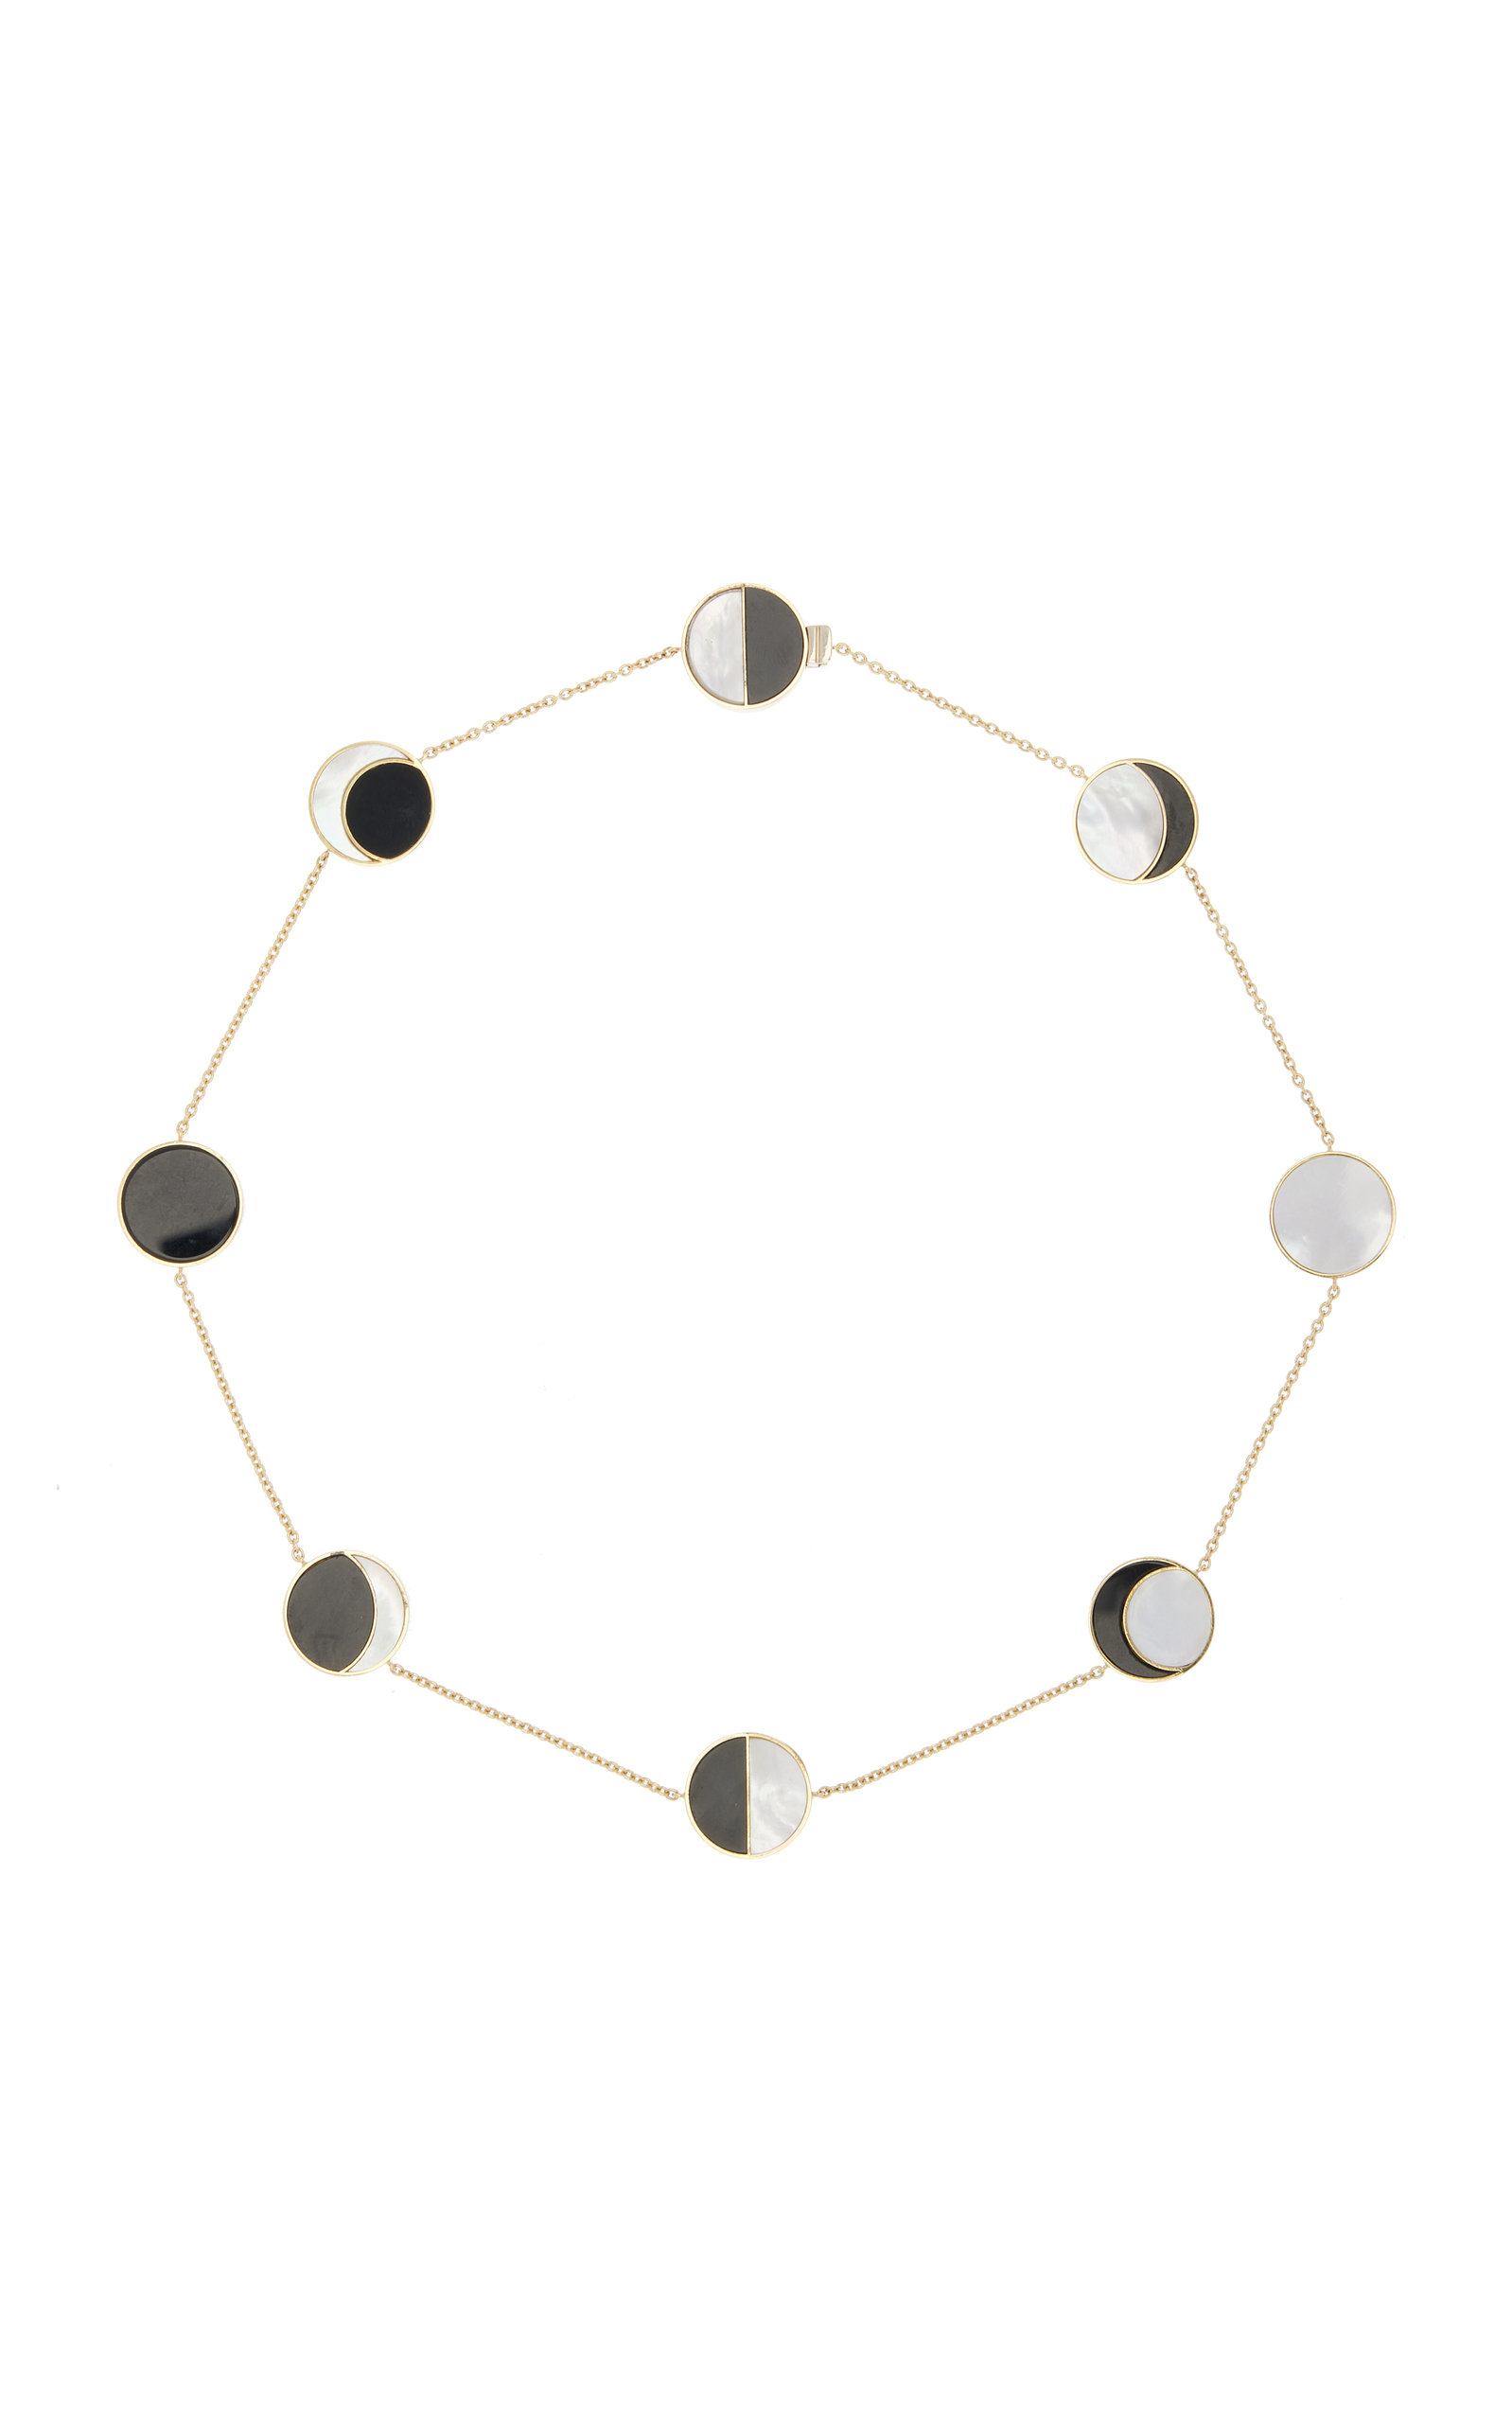 Danielle Marks Women's Eclipse 18k Yellow Gold Onyx; Mother-of-Pearl Necklace